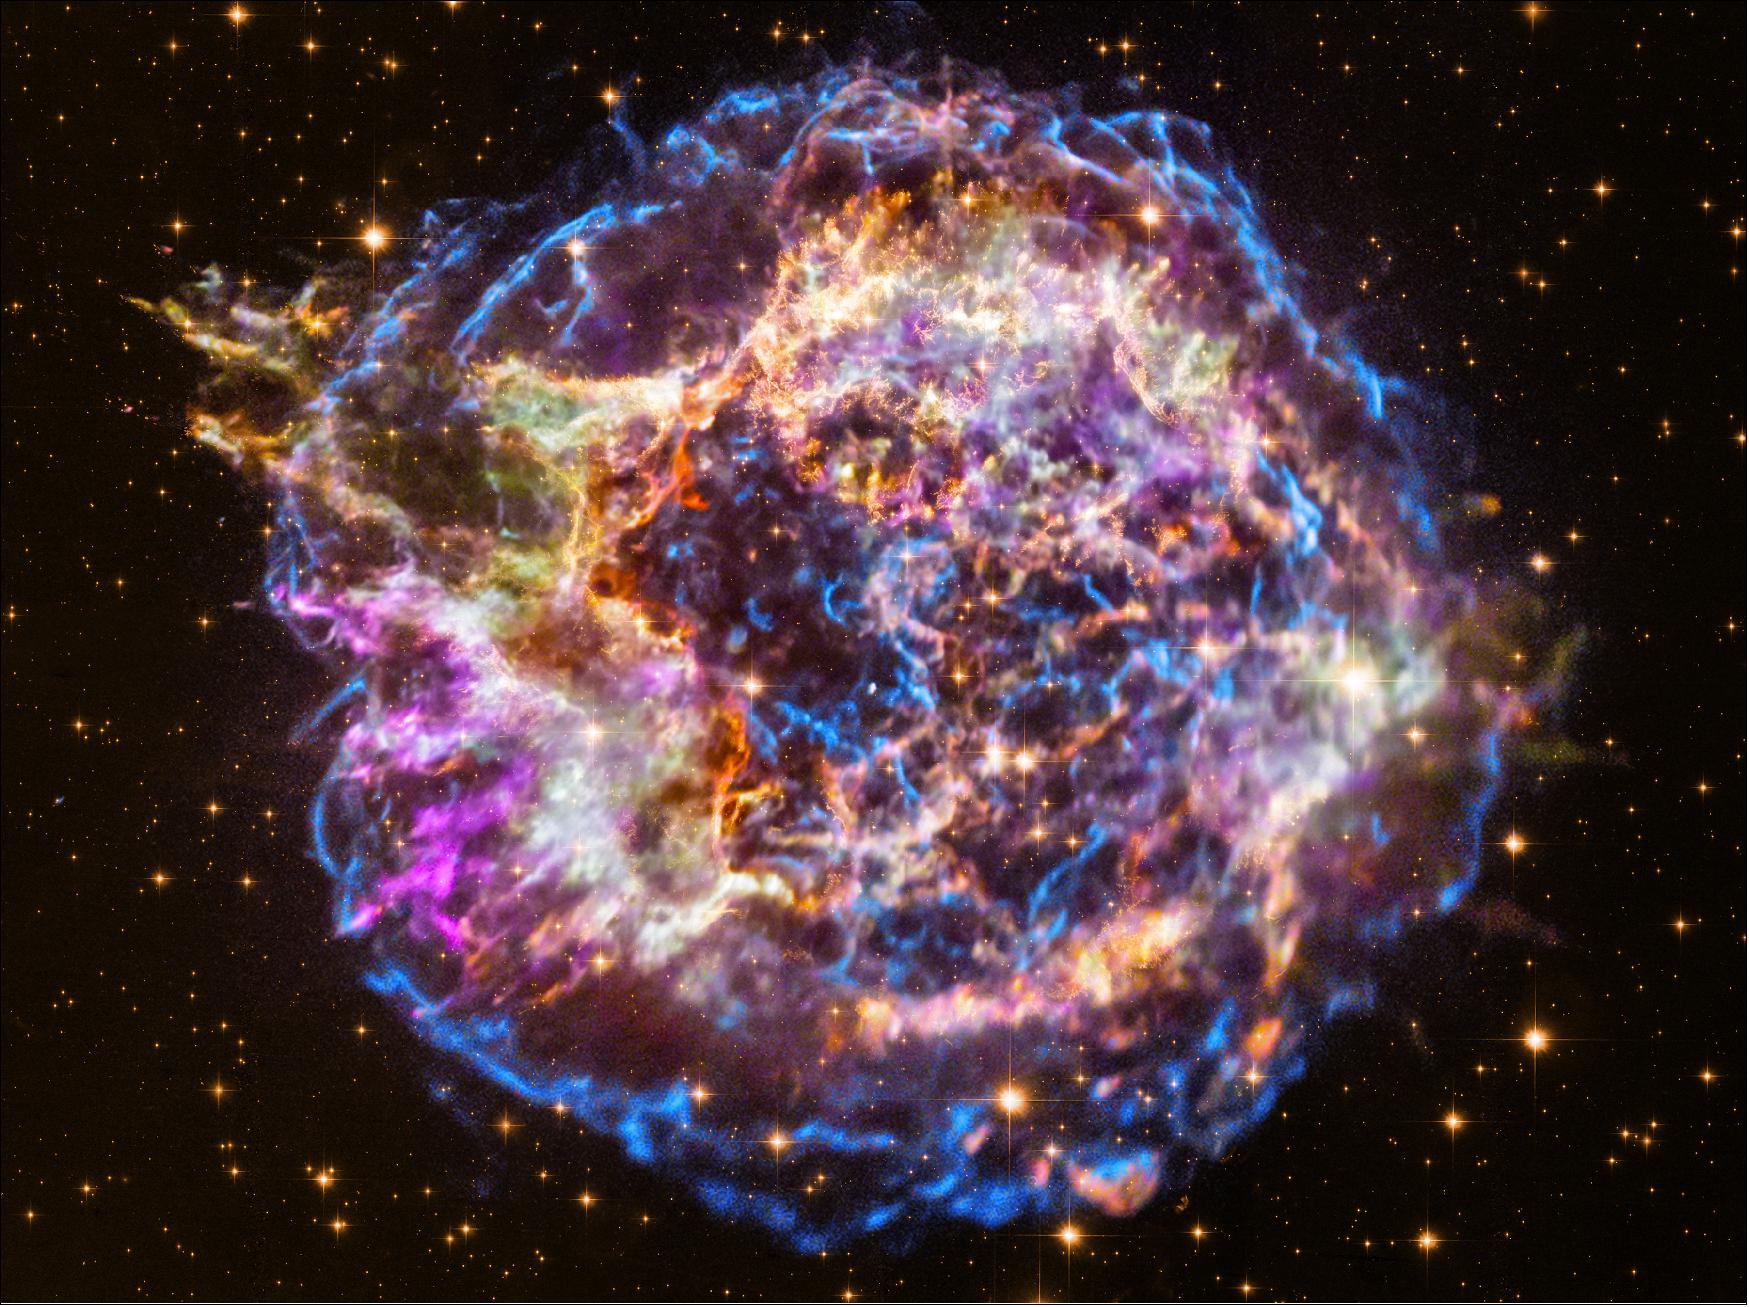 Figure 32: The Latest Look at "First Light" from Chandra. NASA’s Chandra X-ray Observatory has captured many spectacular images of cosmic phenomena over its two decades of operations, but perhaps its most iconic is the supernova remnant Cassiopeia A (image credit: X-ray: NASA/CXC/RIKEN/T. Sato et al.; Optical: NASA/STScI)